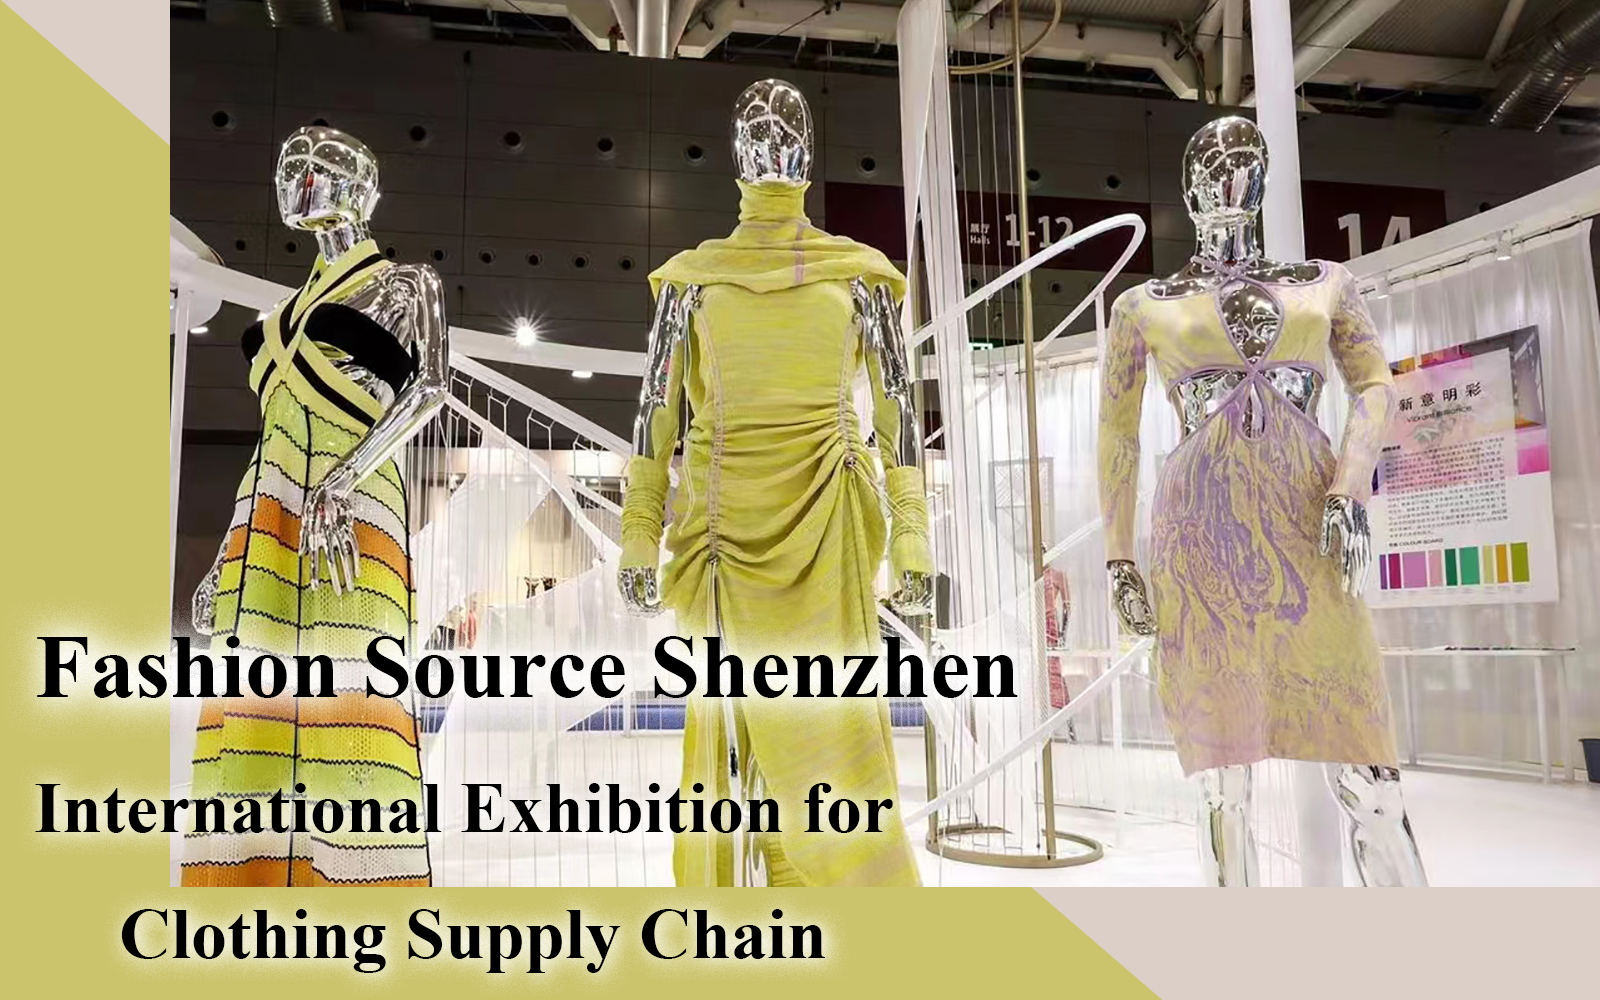 Loop Chronicle -- The Analysis of Fashion Source Shenzhen